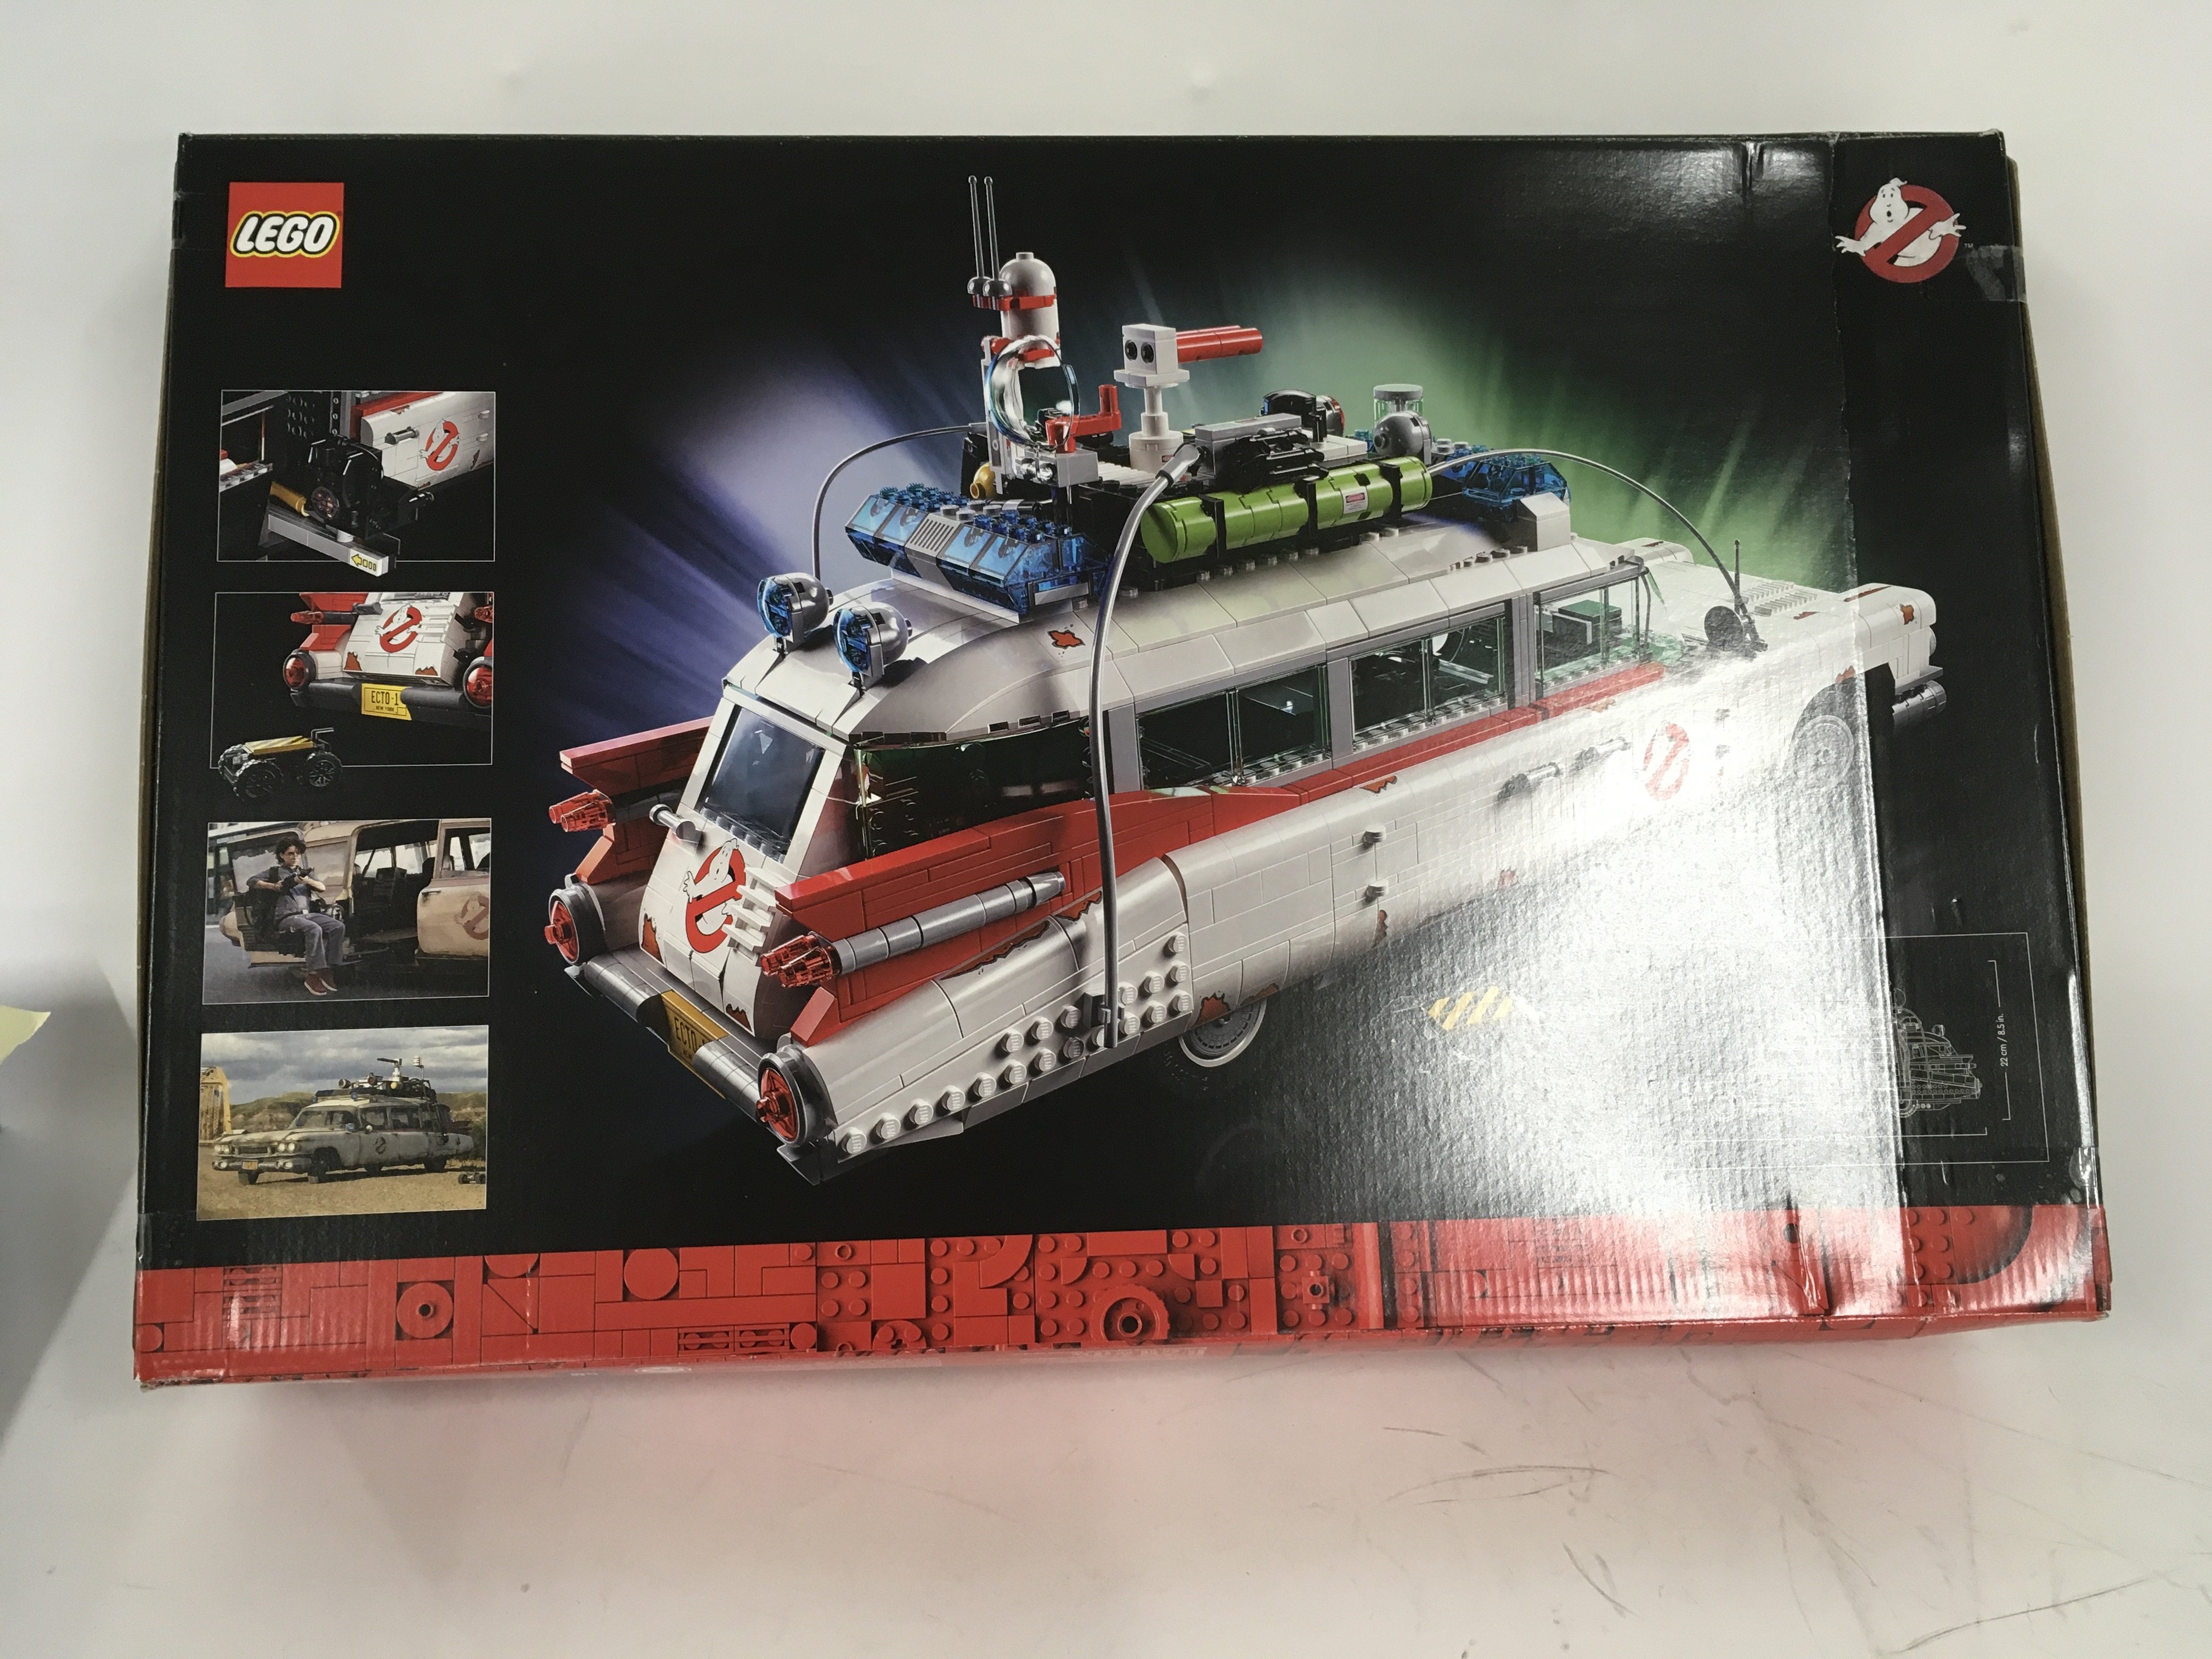 Sealed and unopened Lego set. Ghostbusters 10274 ECTO 1. - Image 4 of 4